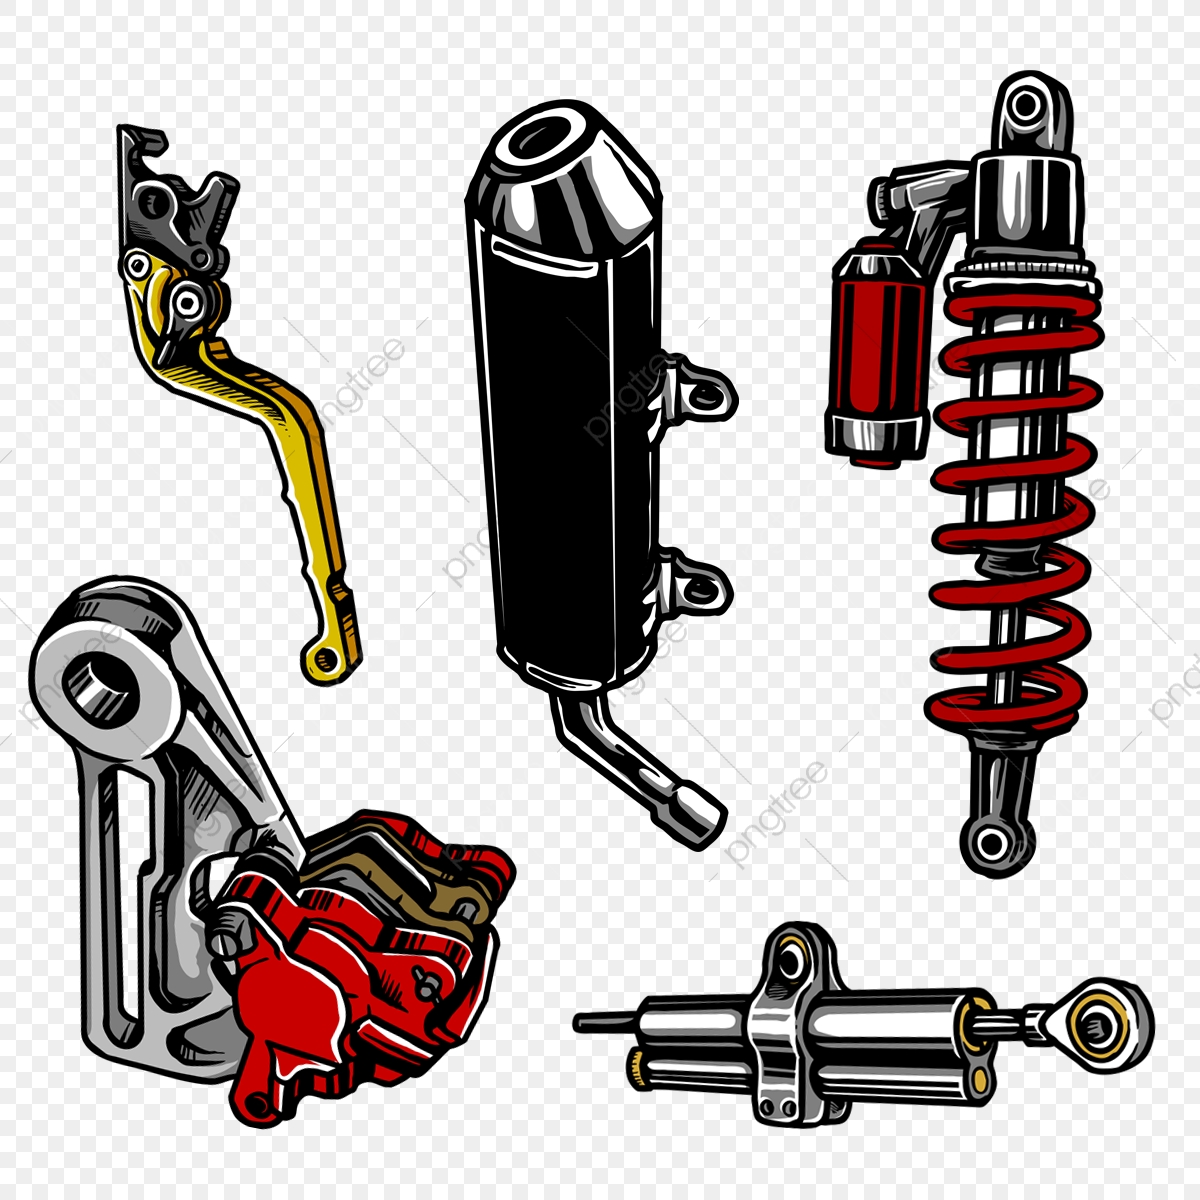 A Set Of Motorcycle Parts, Set, Motorcycle, Part PNG.